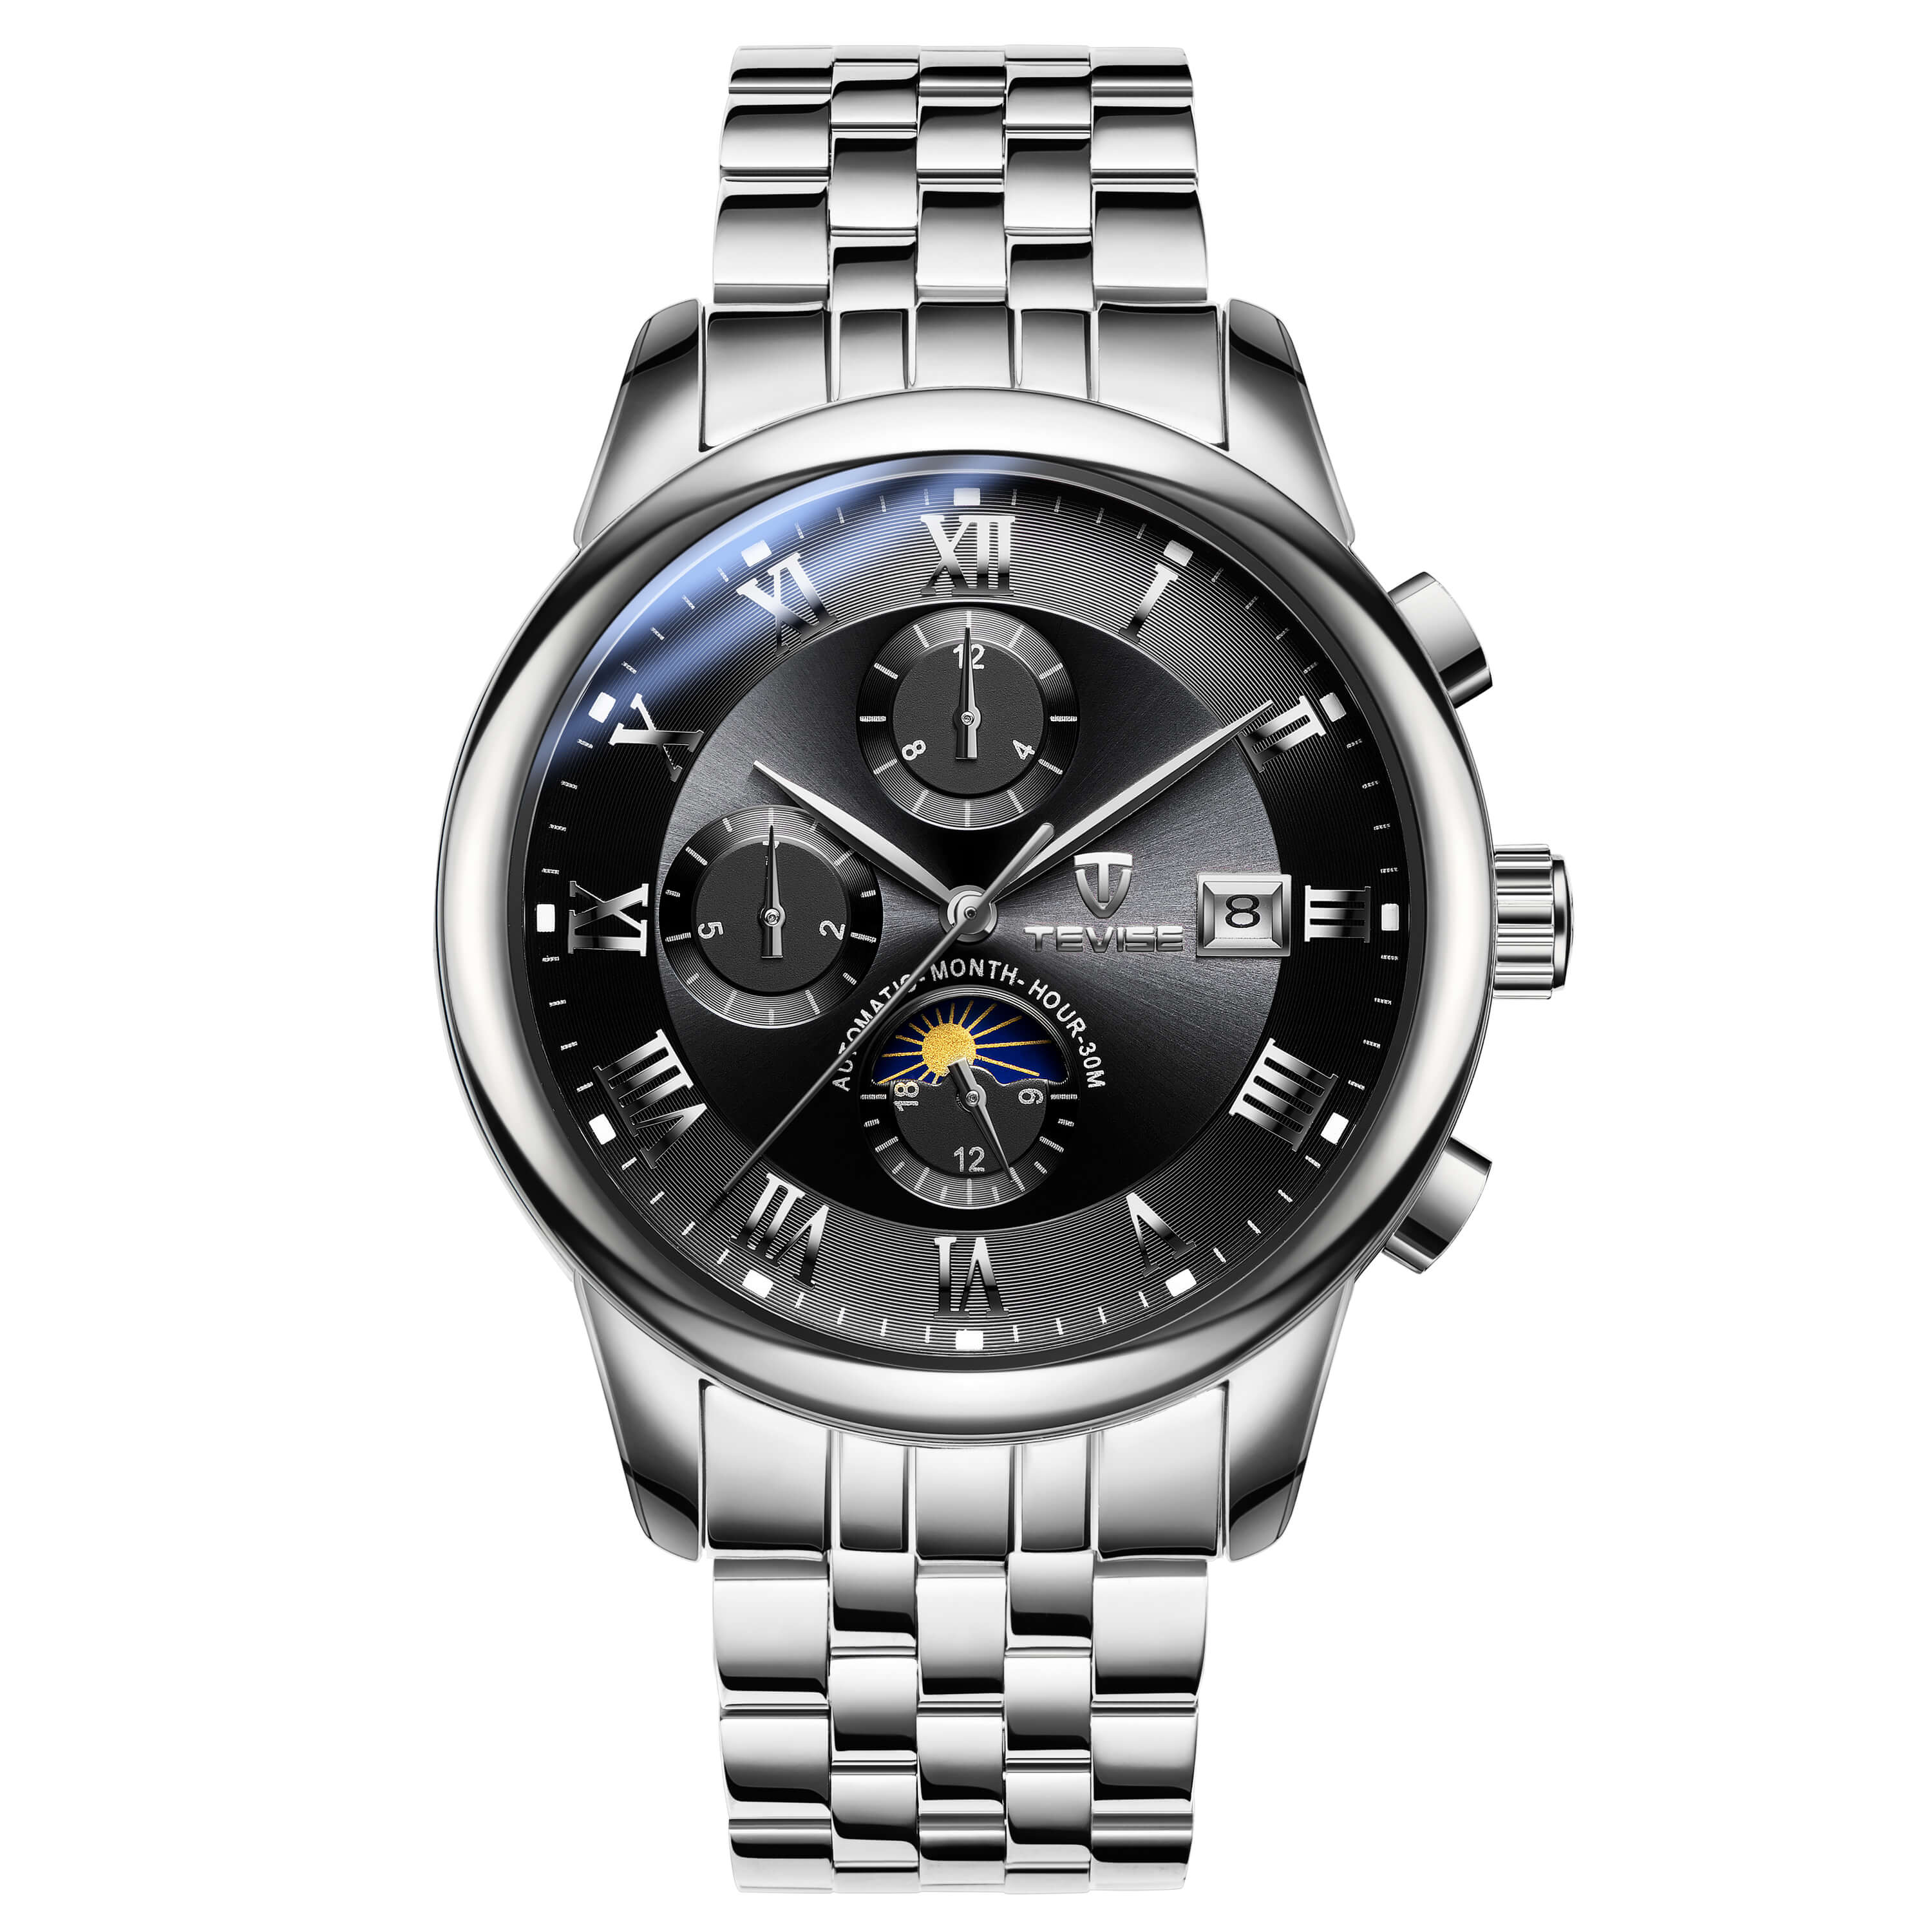 TEVISE 9008 Men's Automatic Mechanical Men's Watch Moon Phase Stainless Steel - Black